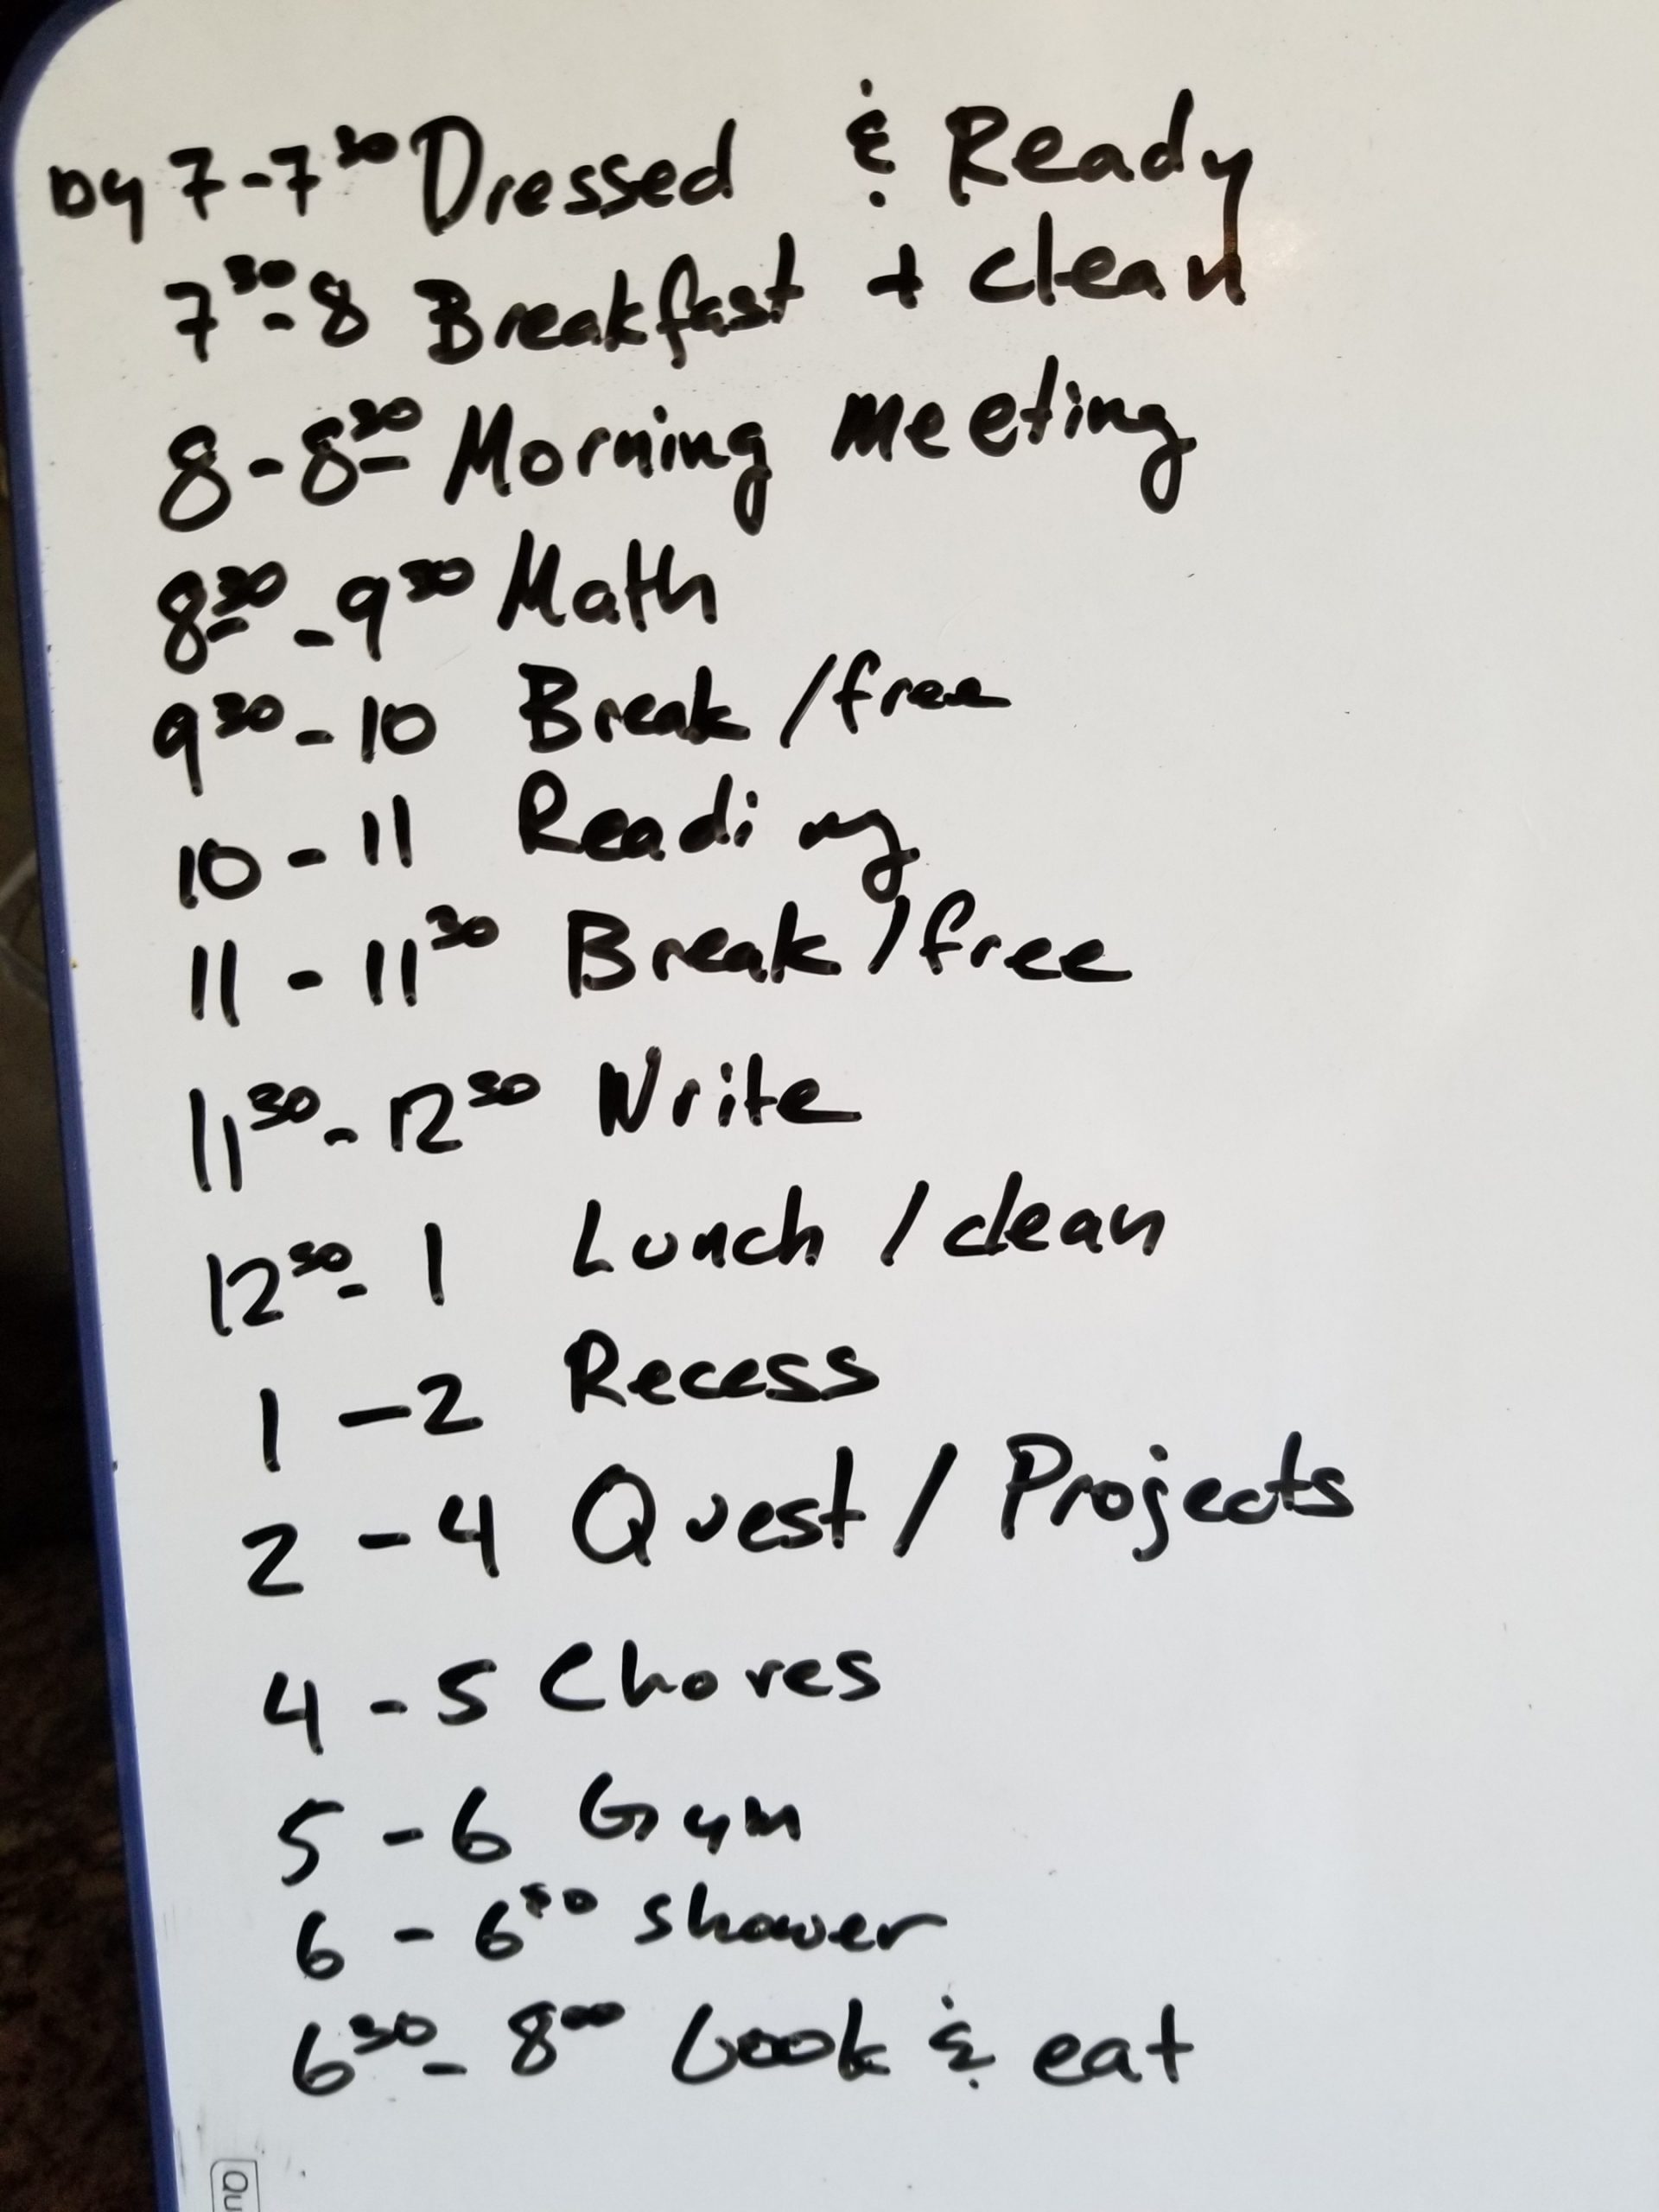 Daily Schedule